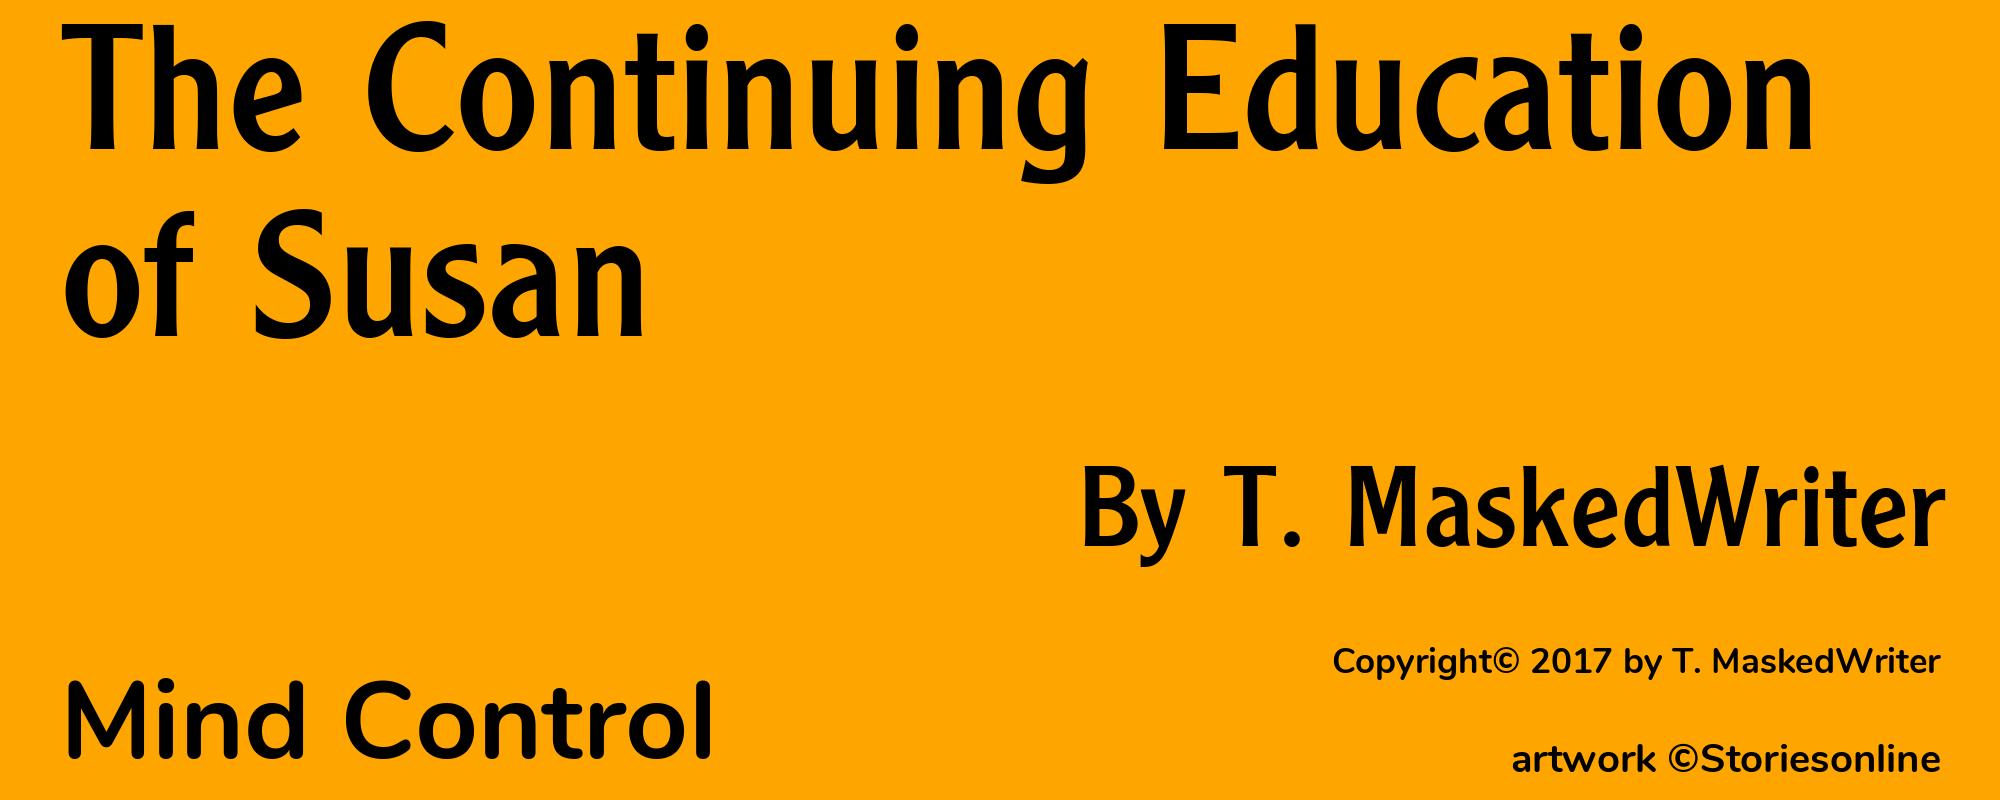 The Continuing Education of Susan - Cover